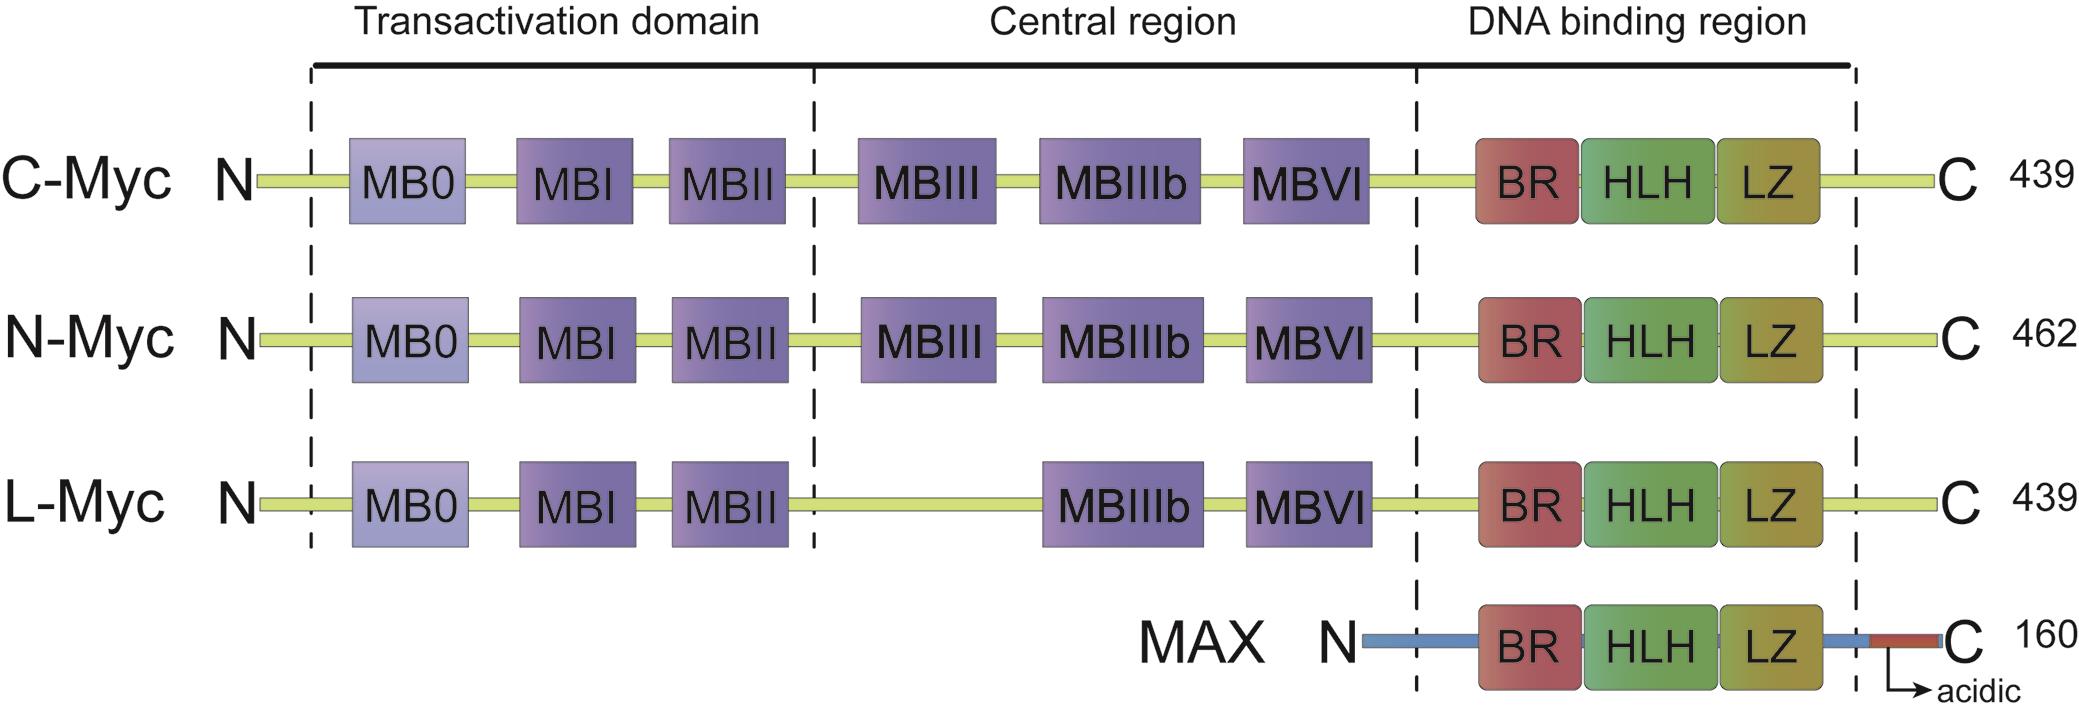 Structure of MYC proteins and MAX.